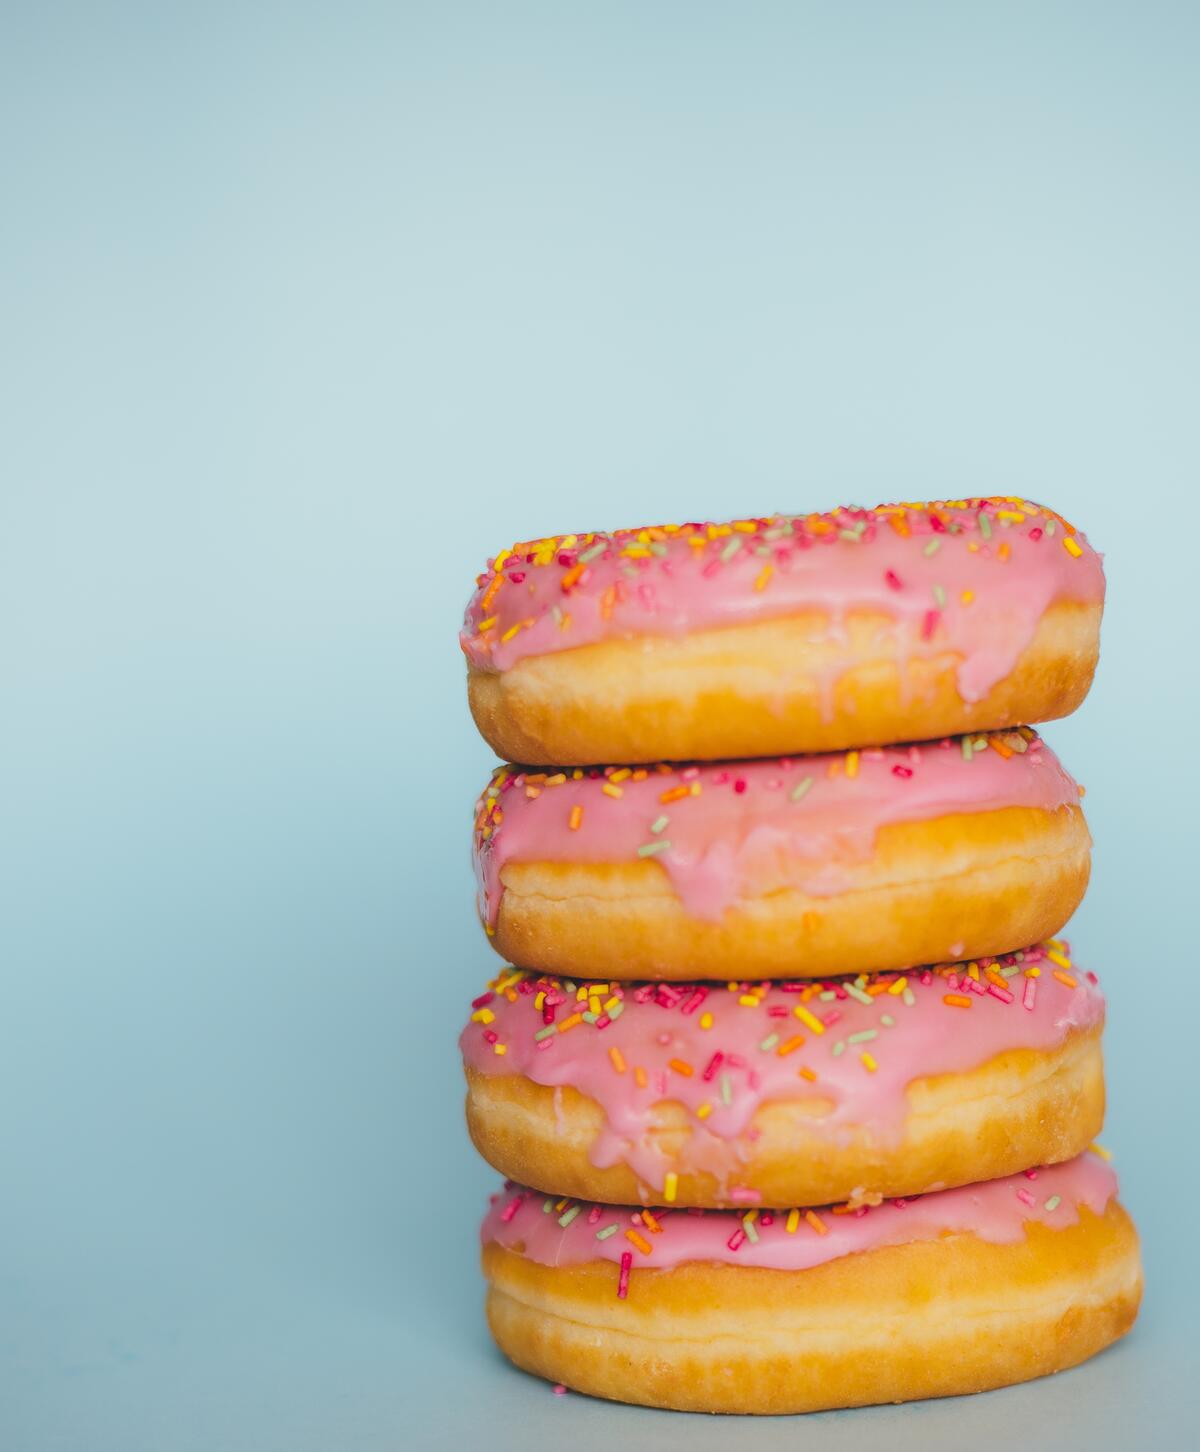 A pyramid of sweet donuts